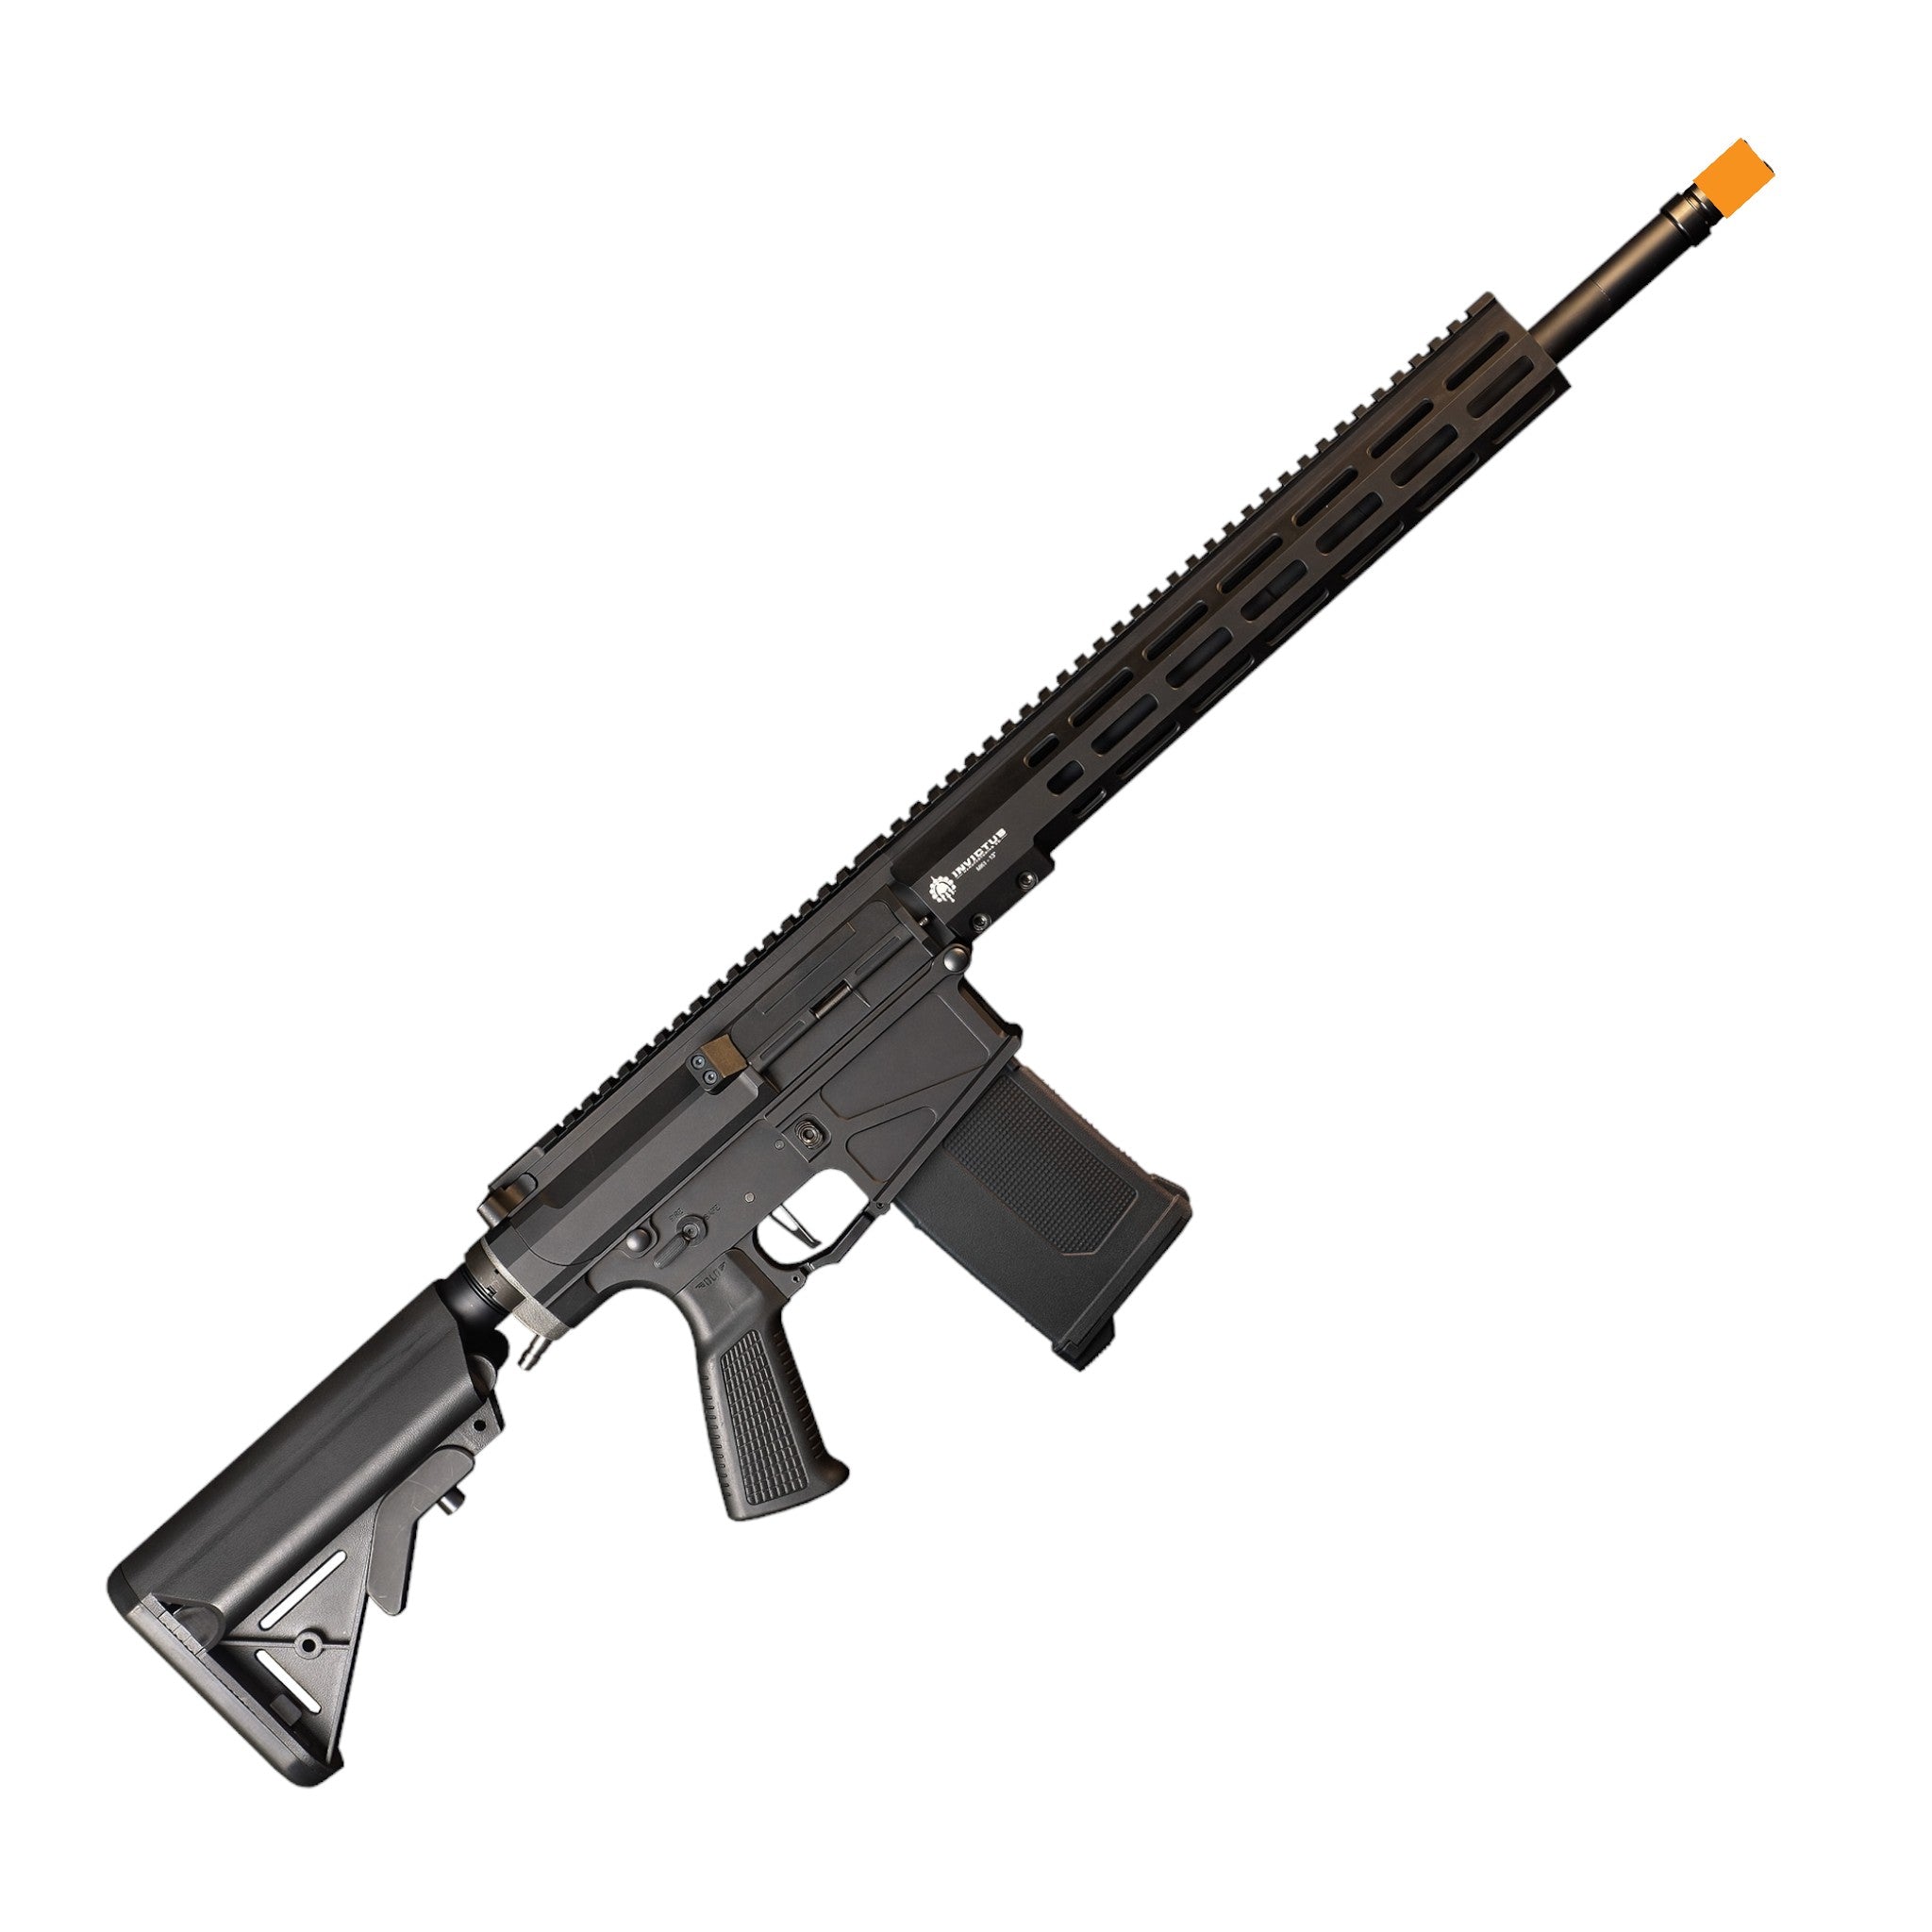 Wolverine MTW 308 Series HPA Airsoft Rifle (PRE ORDER)